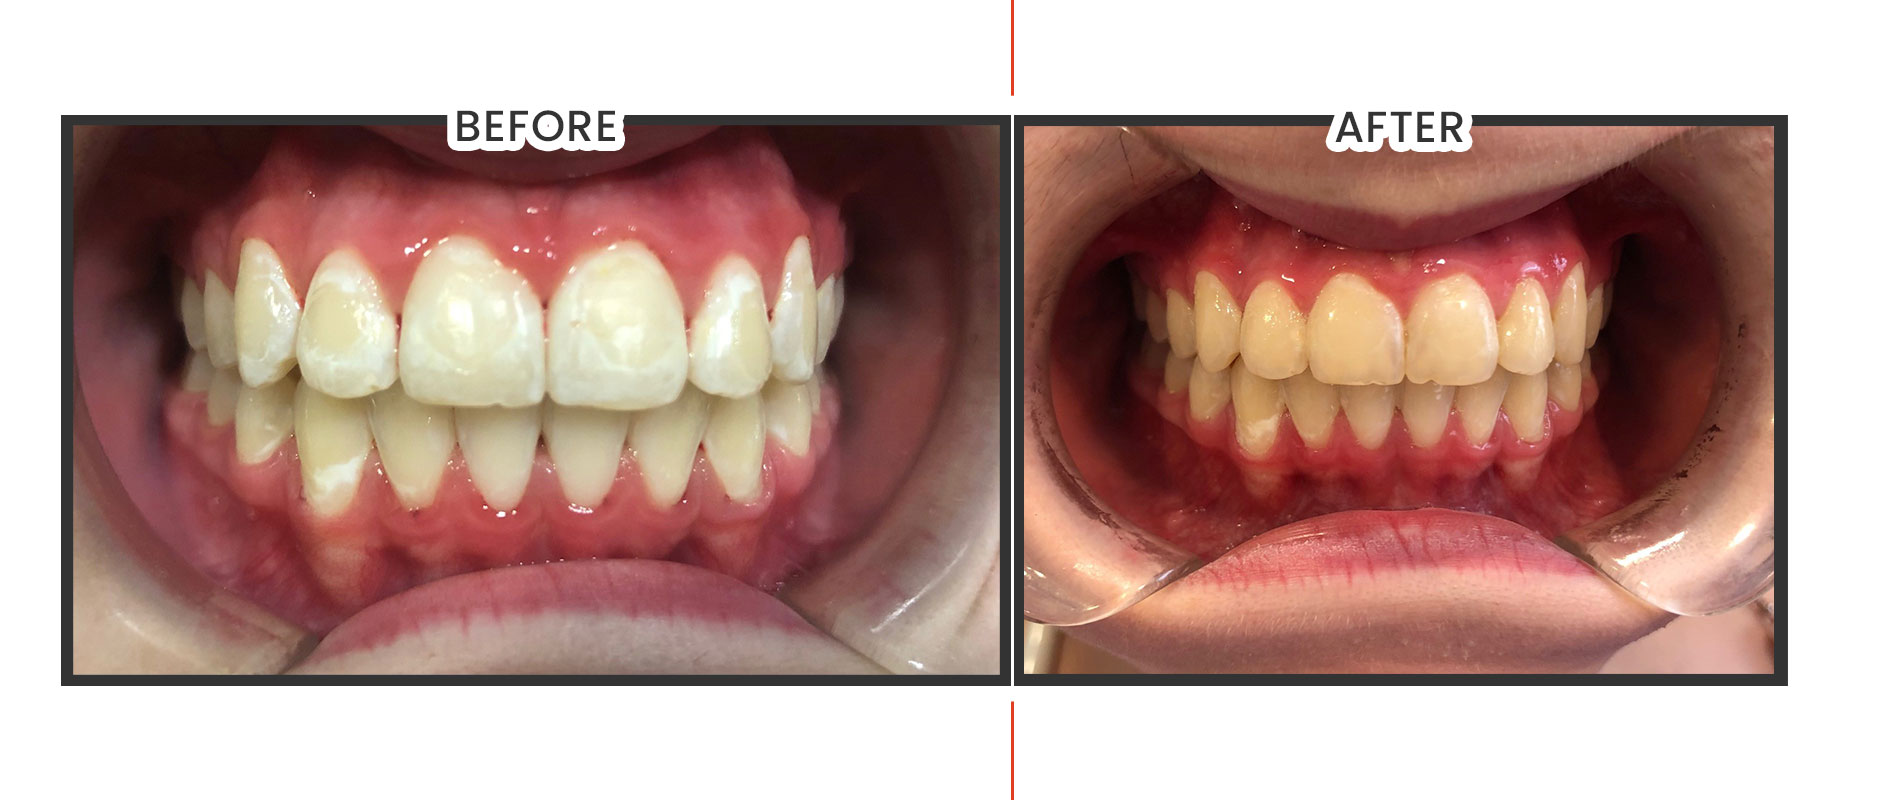 What Can I Do With The White Spots On My Tooth?